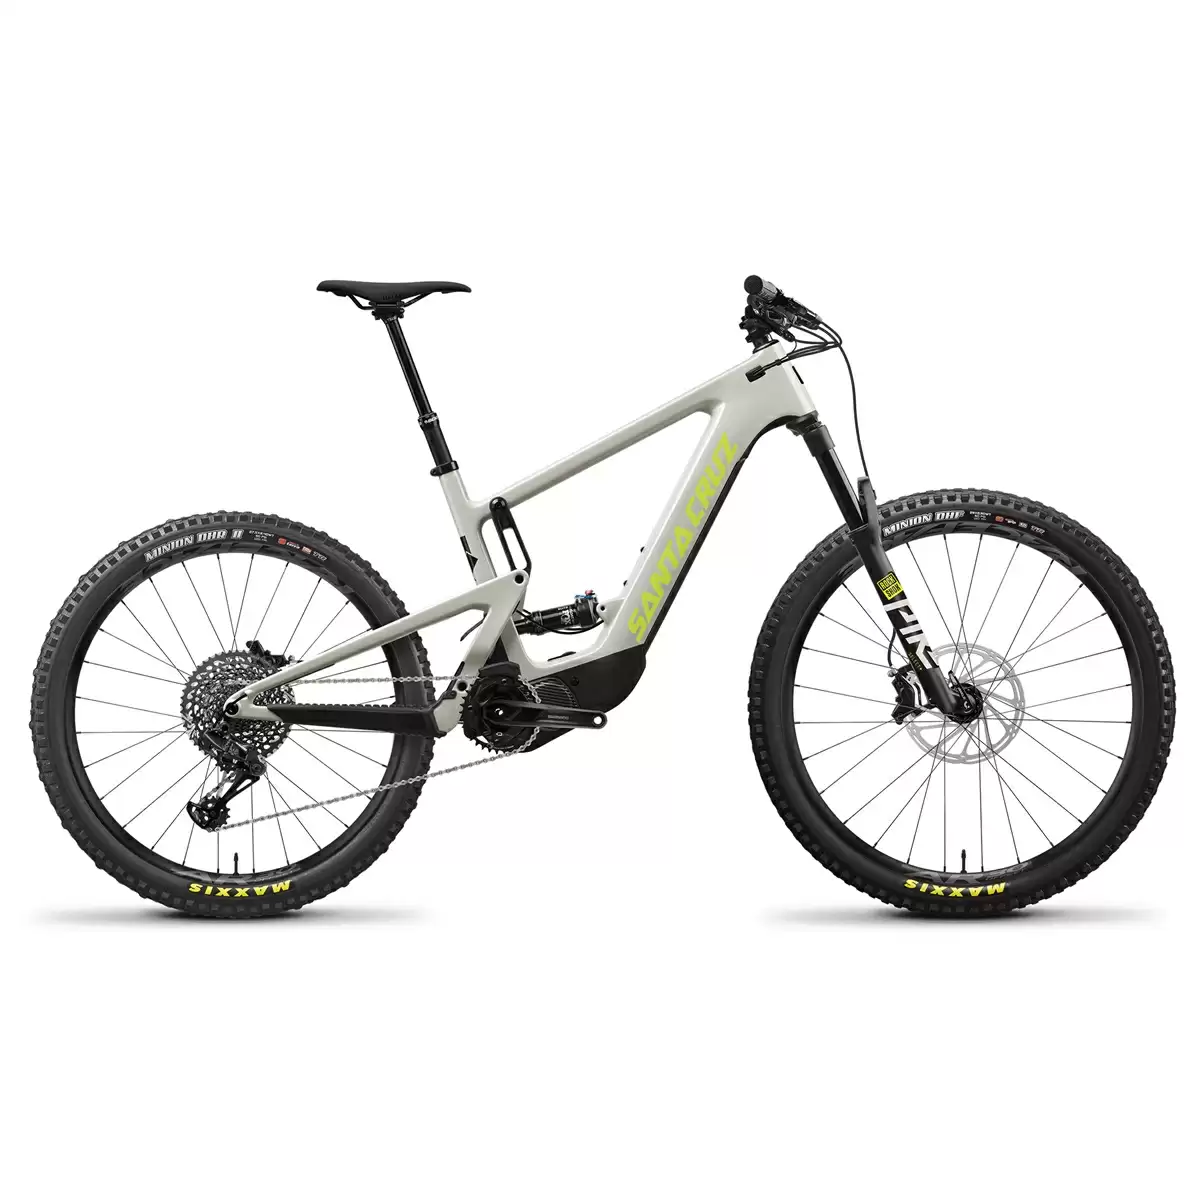 Heckler CC MX Lite S 29''/27.5'' 140mm 12s 504Wh Shimano EP8 Grey 2021 Size M - image